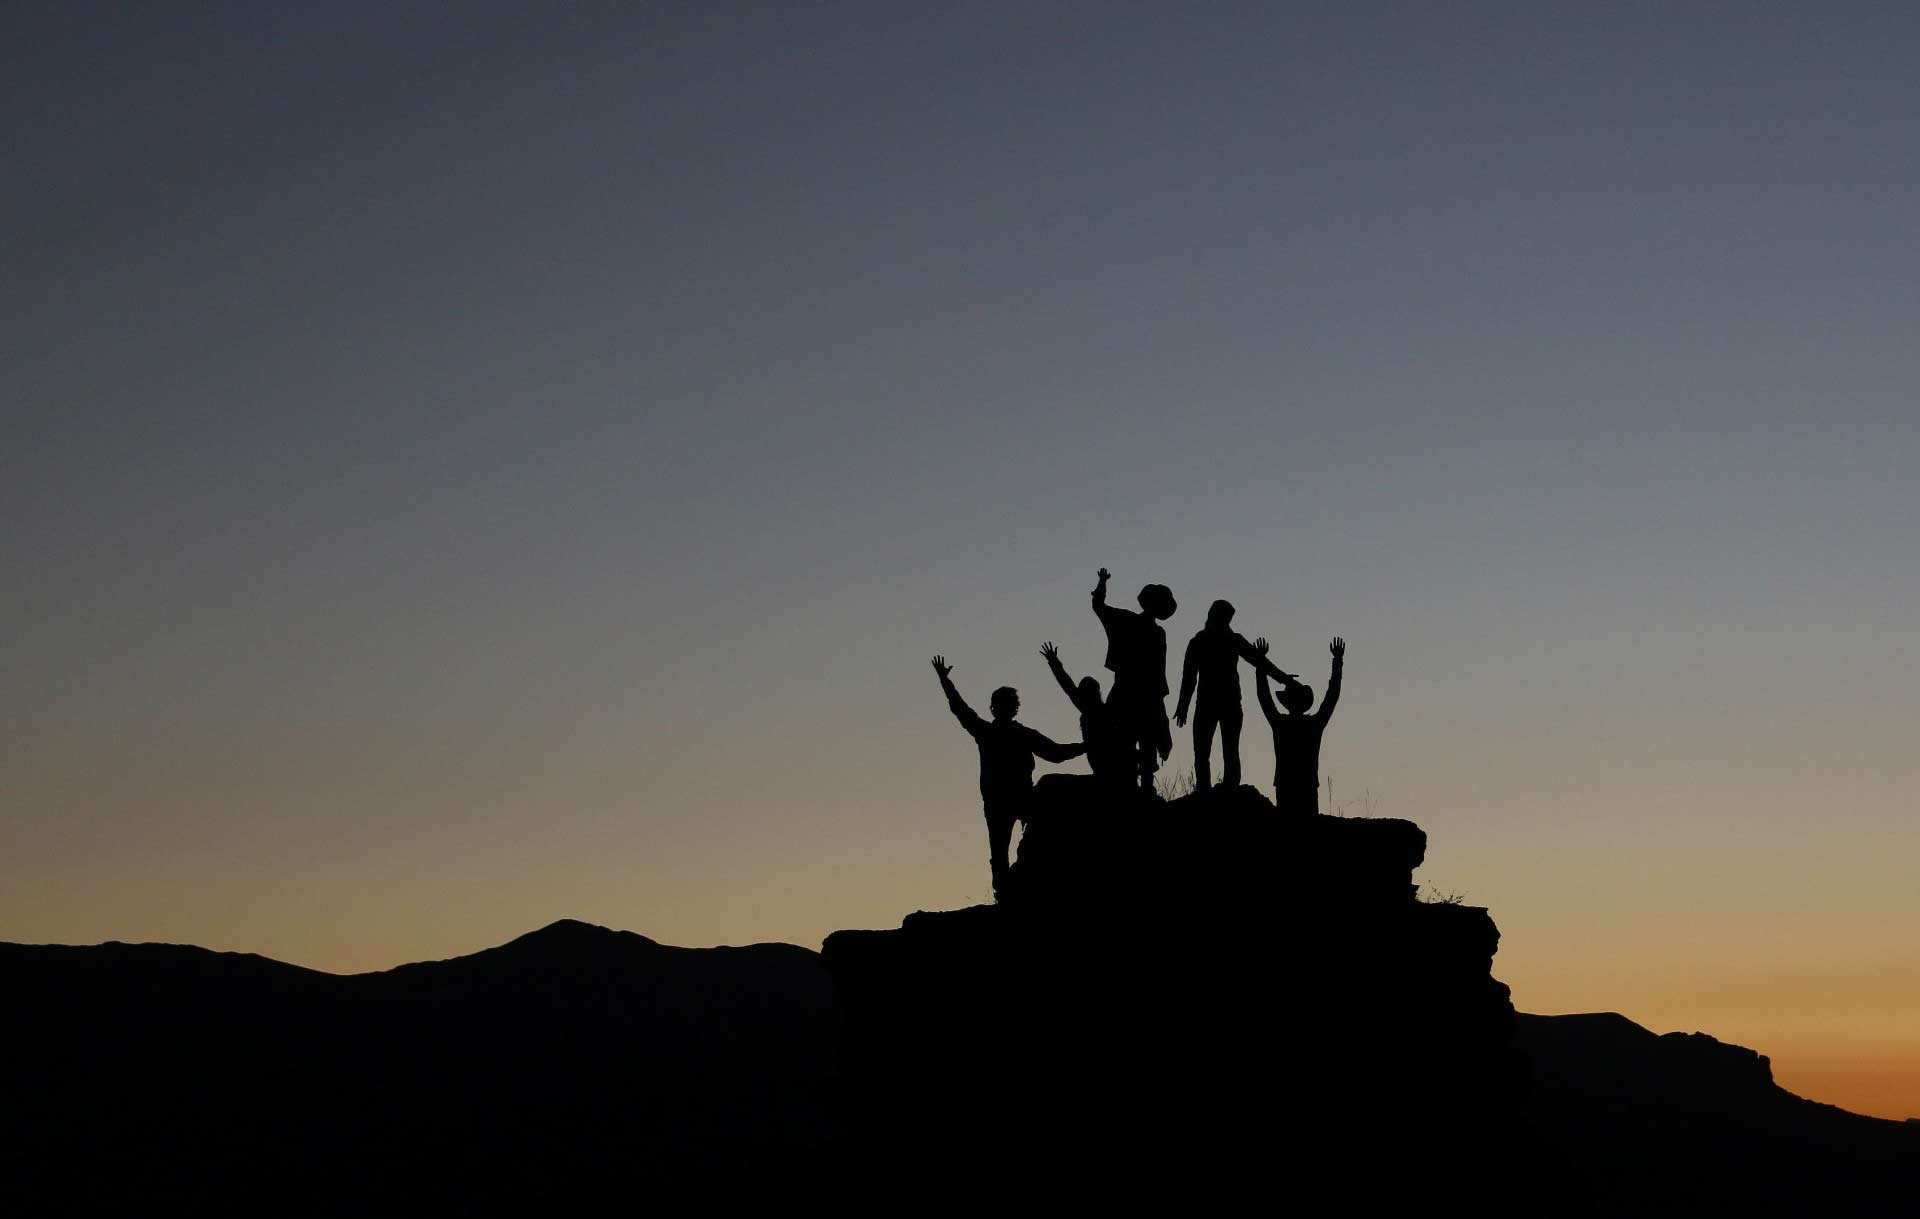 Silhouette of people on top of a mountain peak cheering during sunset. Photo by Natalie Pedigo on Unsplash